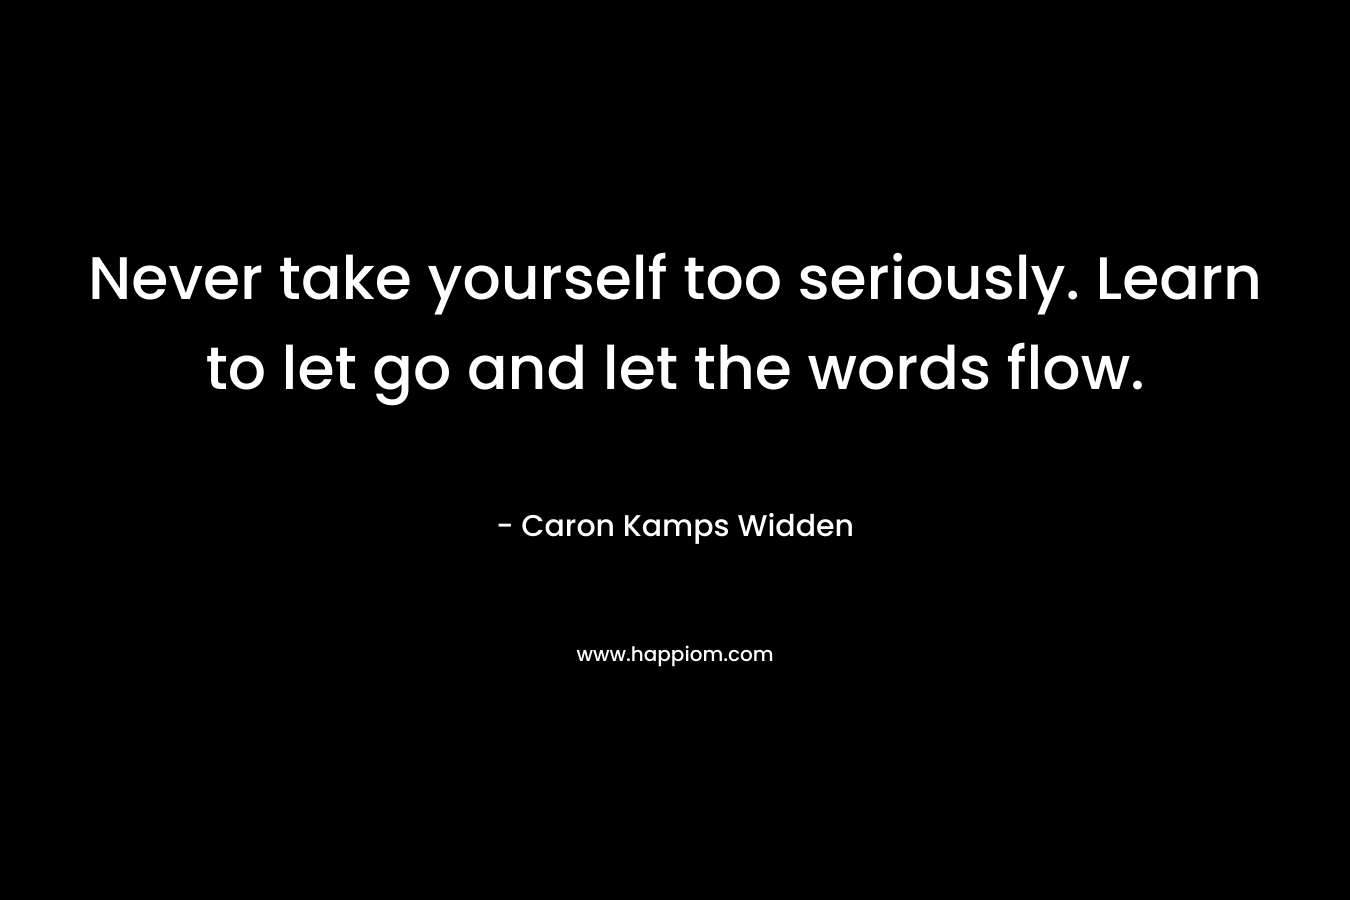 Never take yourself too seriously. Learn to let go and let the words flow. – Caron Kamps Widden